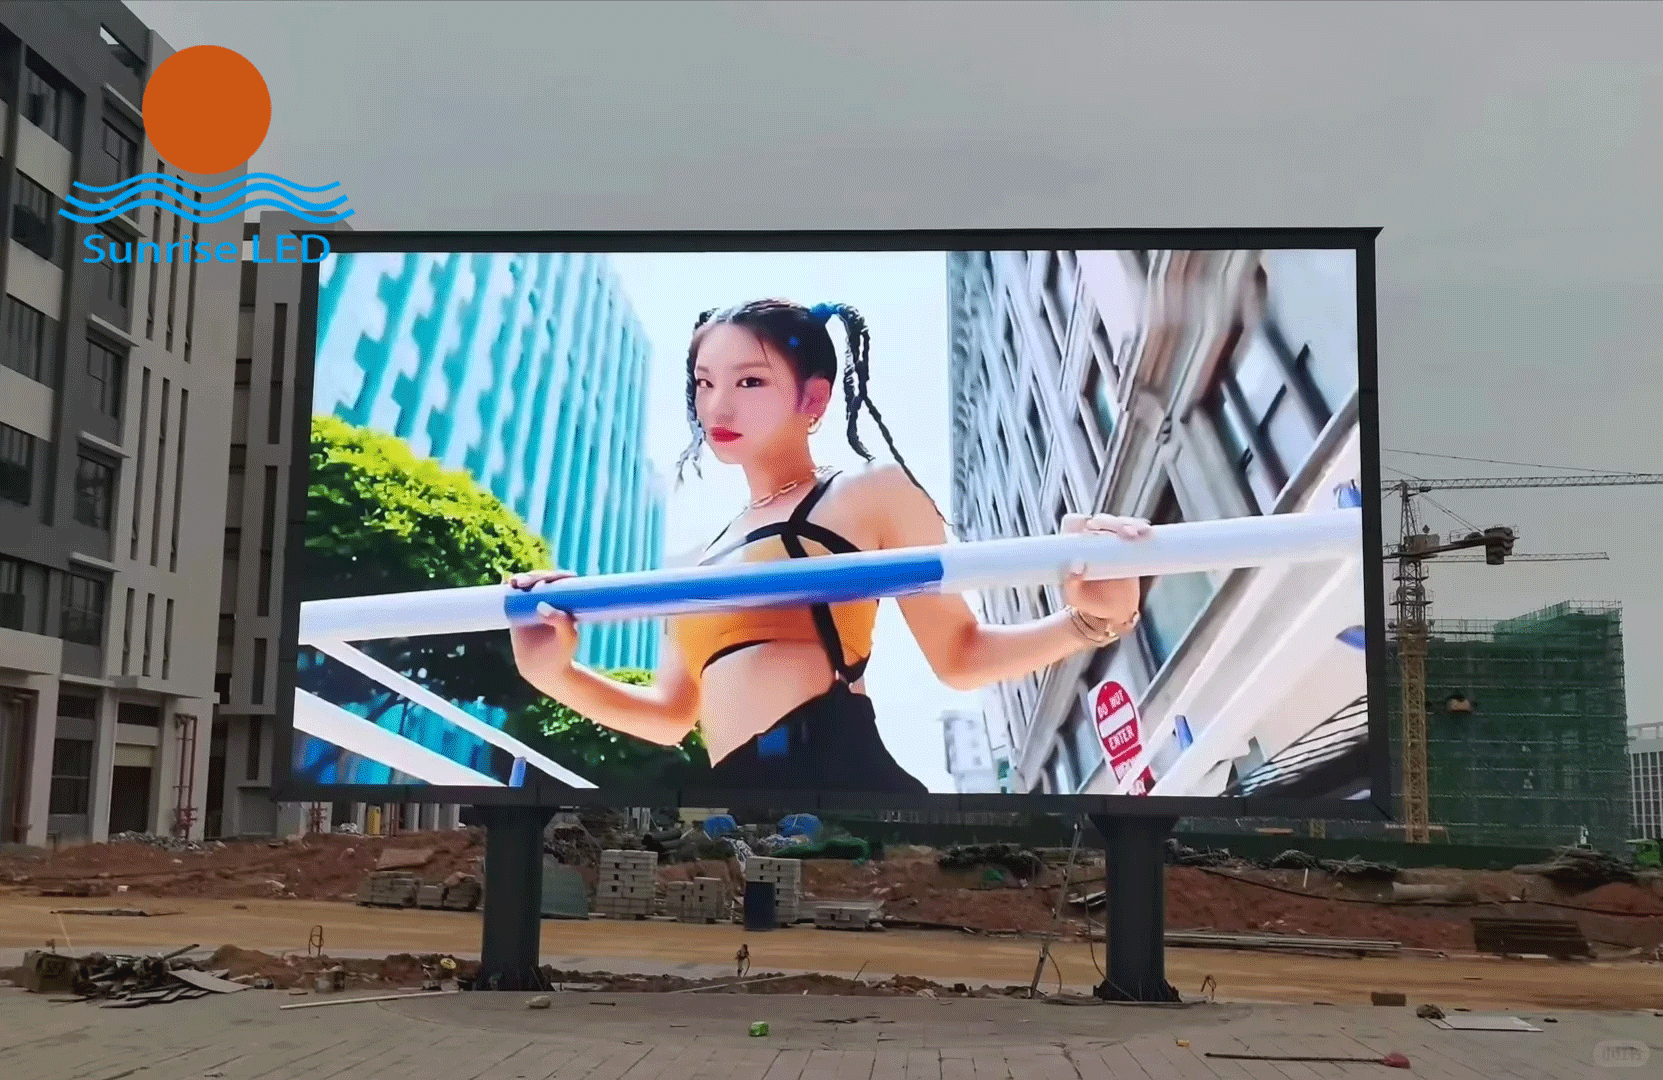 What are the advantages of the outdoor LED display over the in-line type?